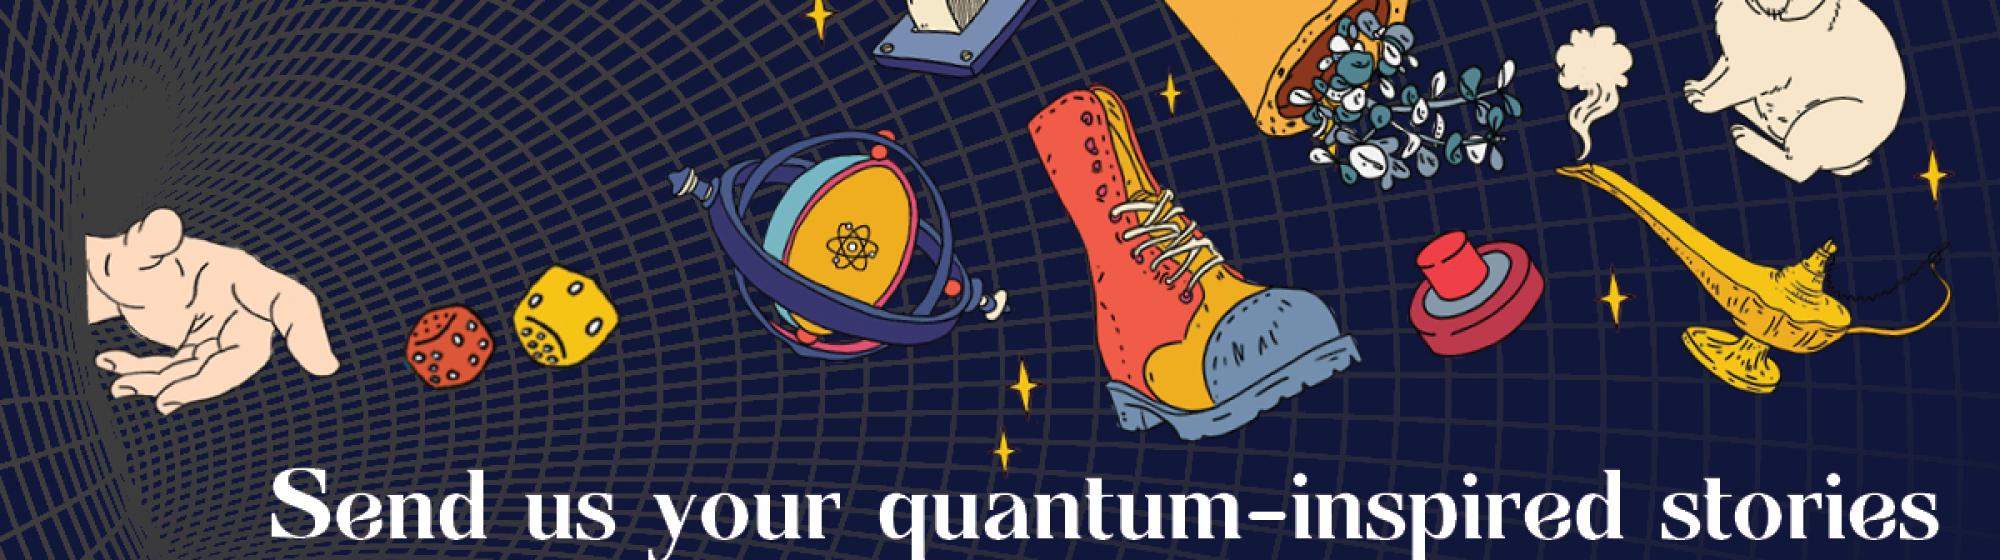 Image for the Quantum Shorts 2020 competition